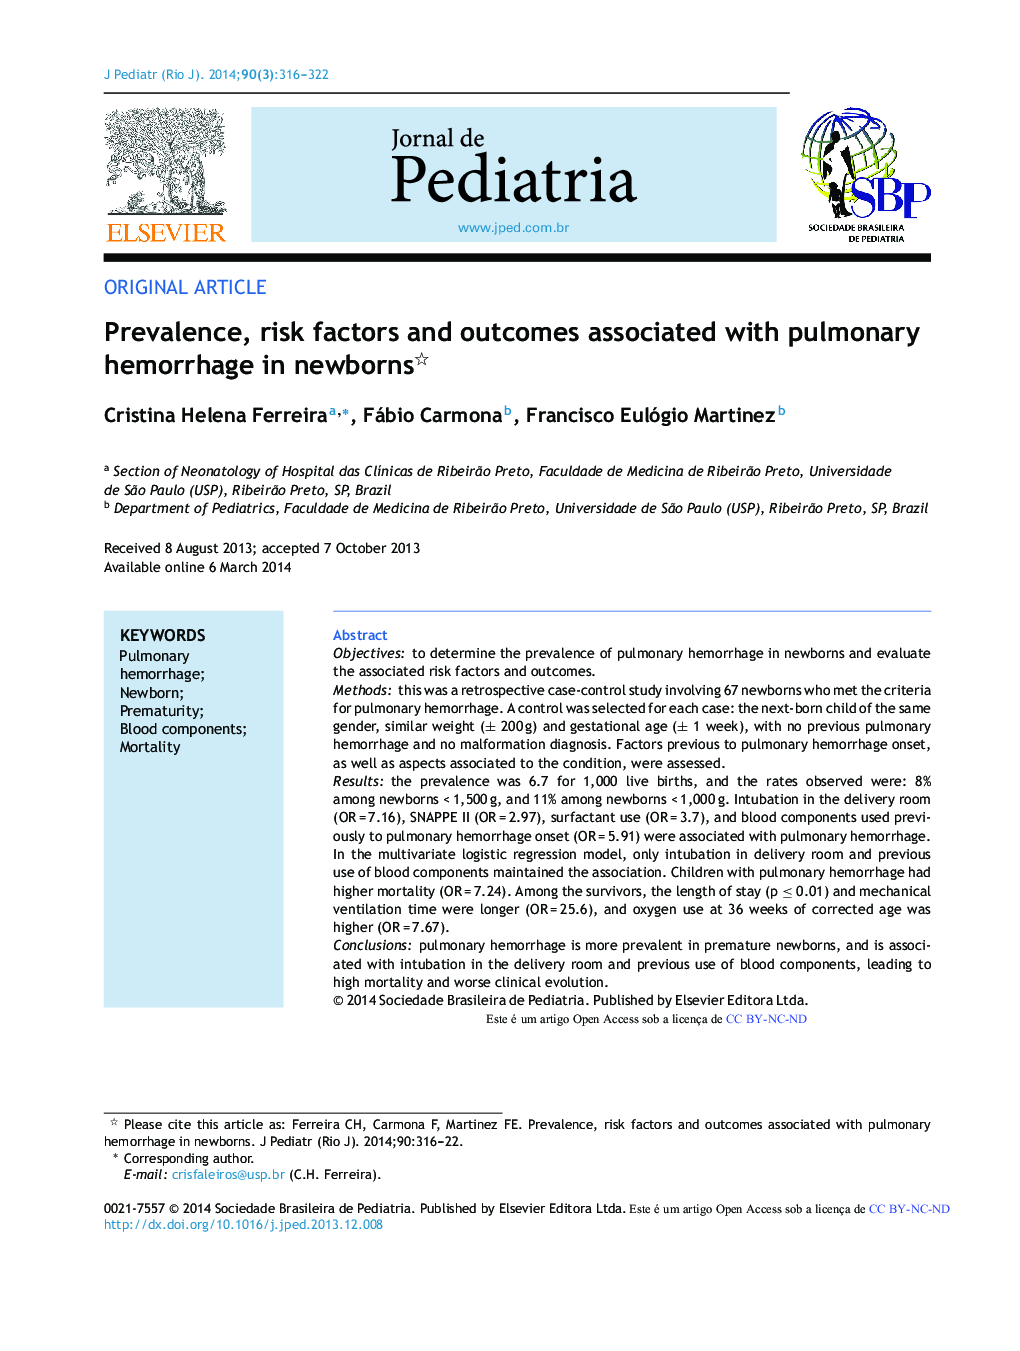 Prevalence, risk factors and outcomes associated with pulmonary hemorrhage in newborns 